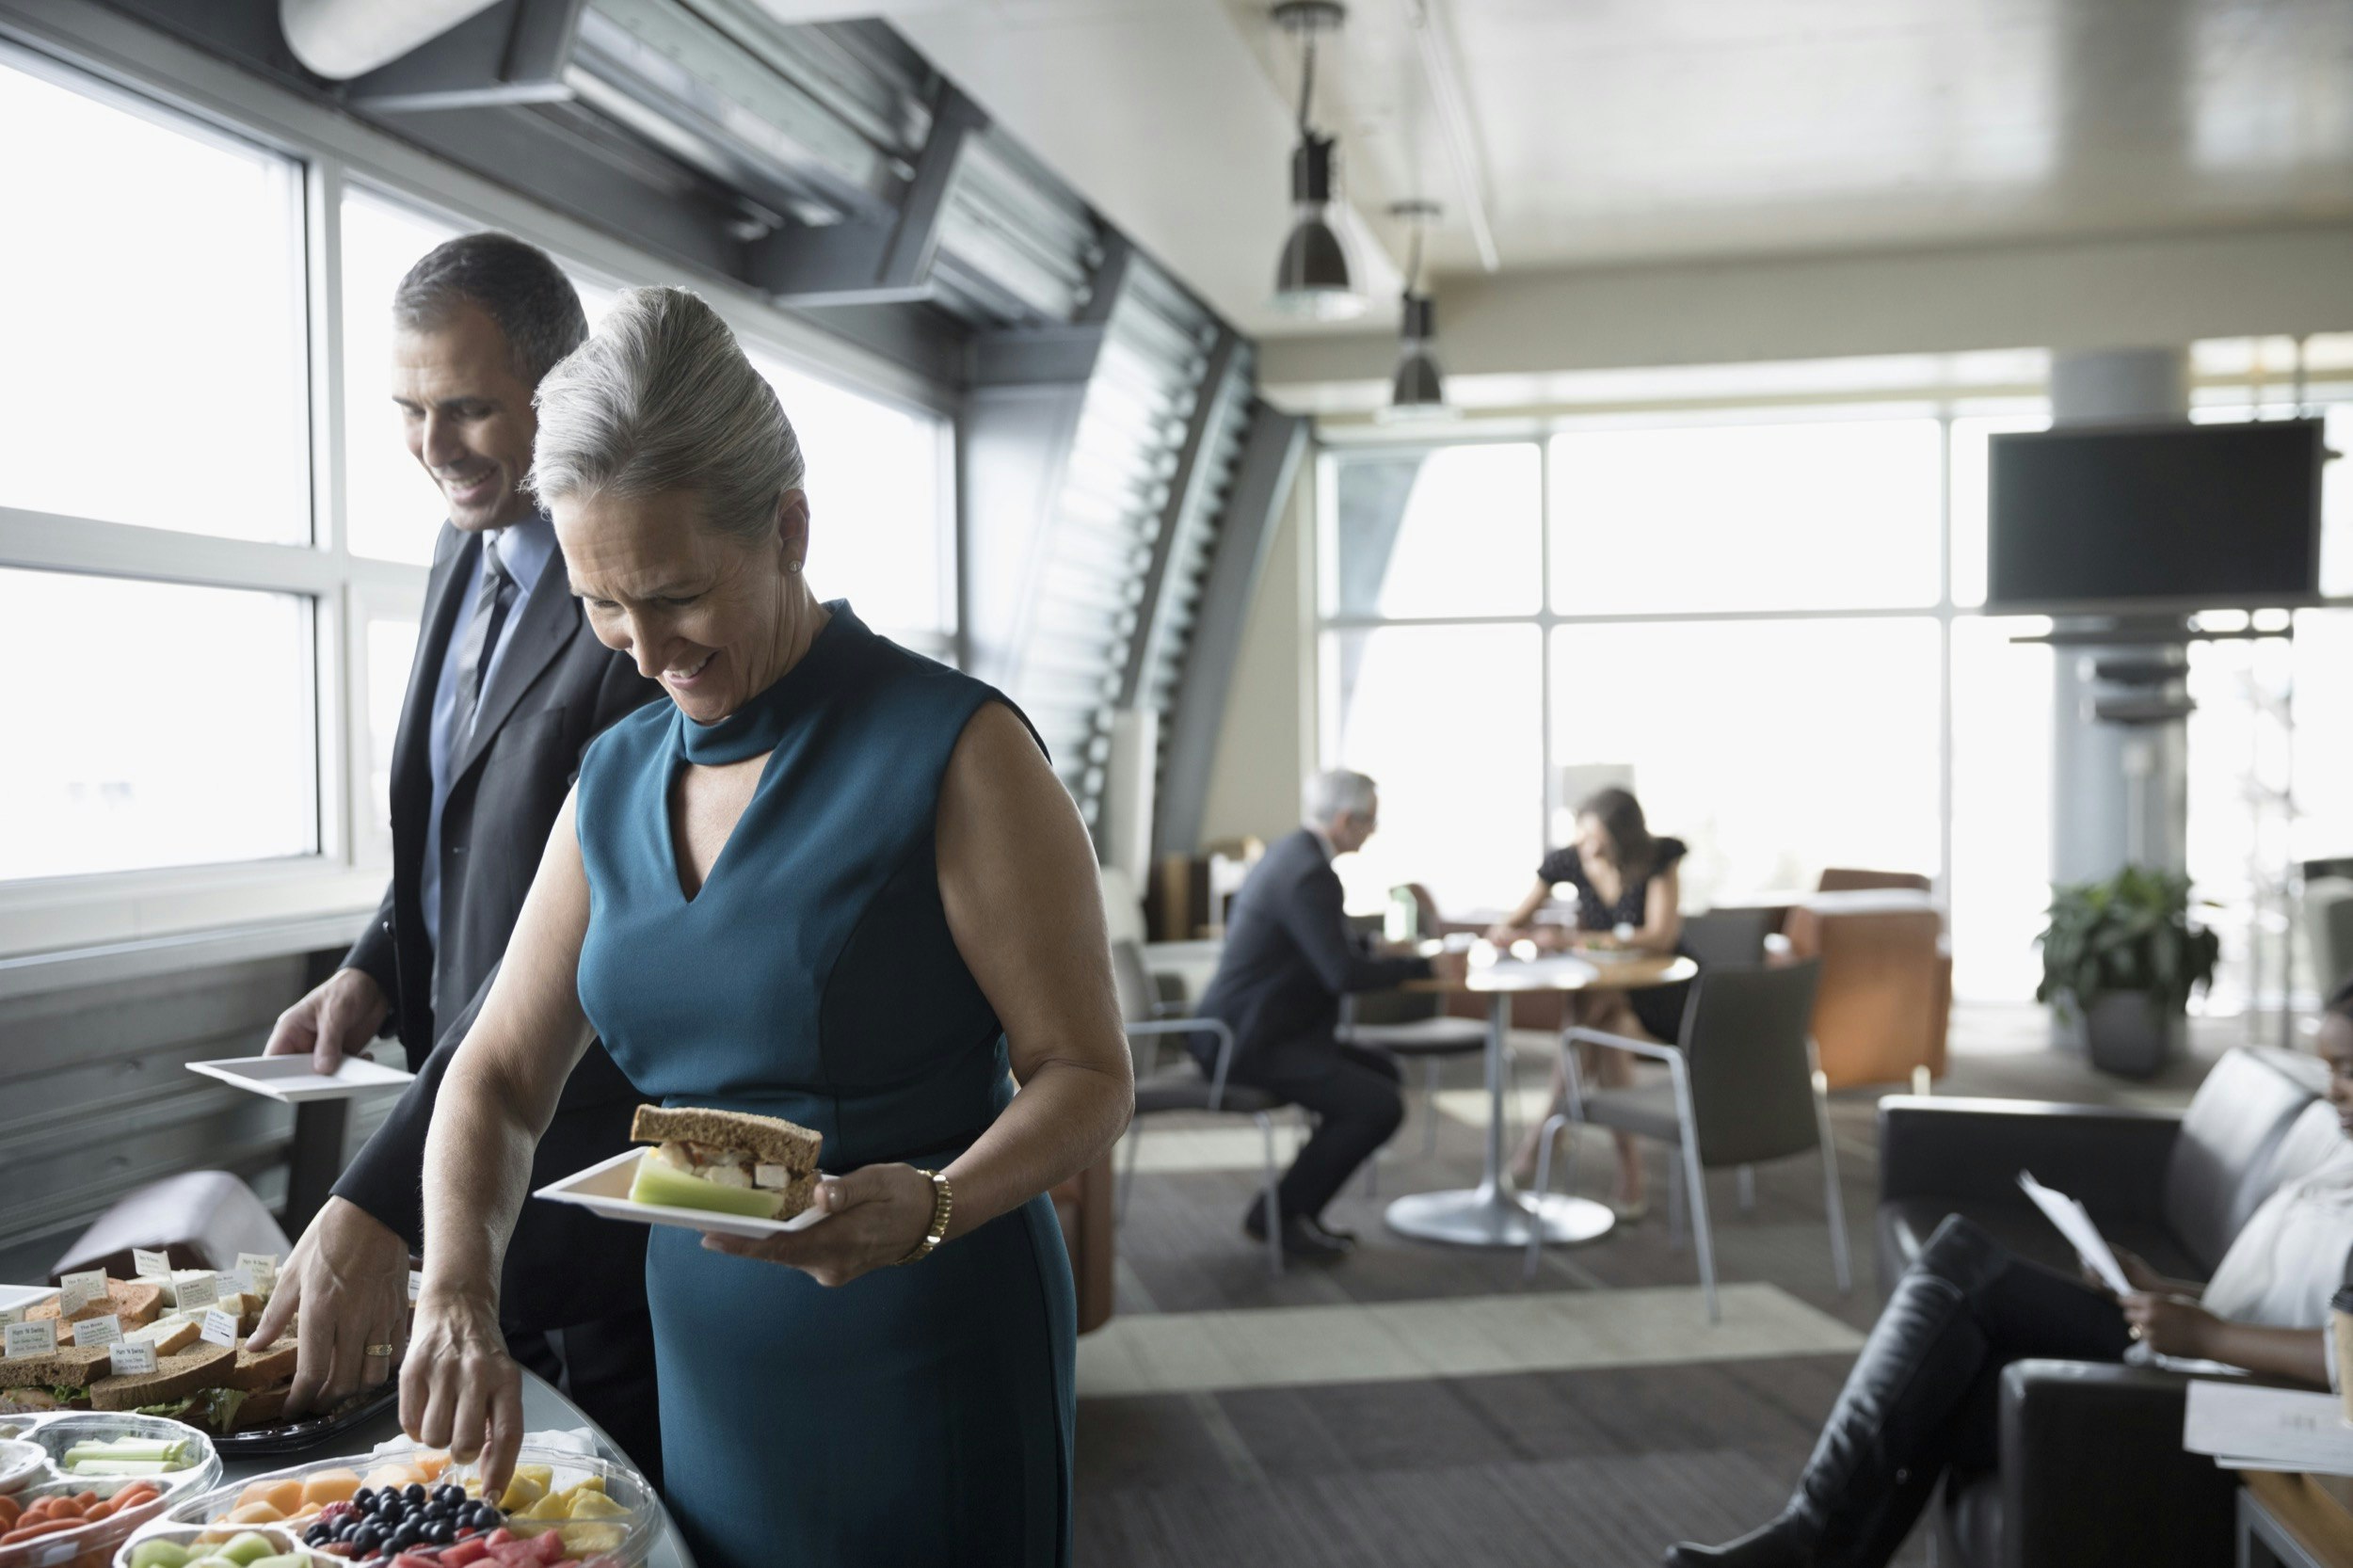 A man and woman pick up food from a buffet table as other travelers sit in comfortable chairs in an airport lounge; Upgrade your travel game